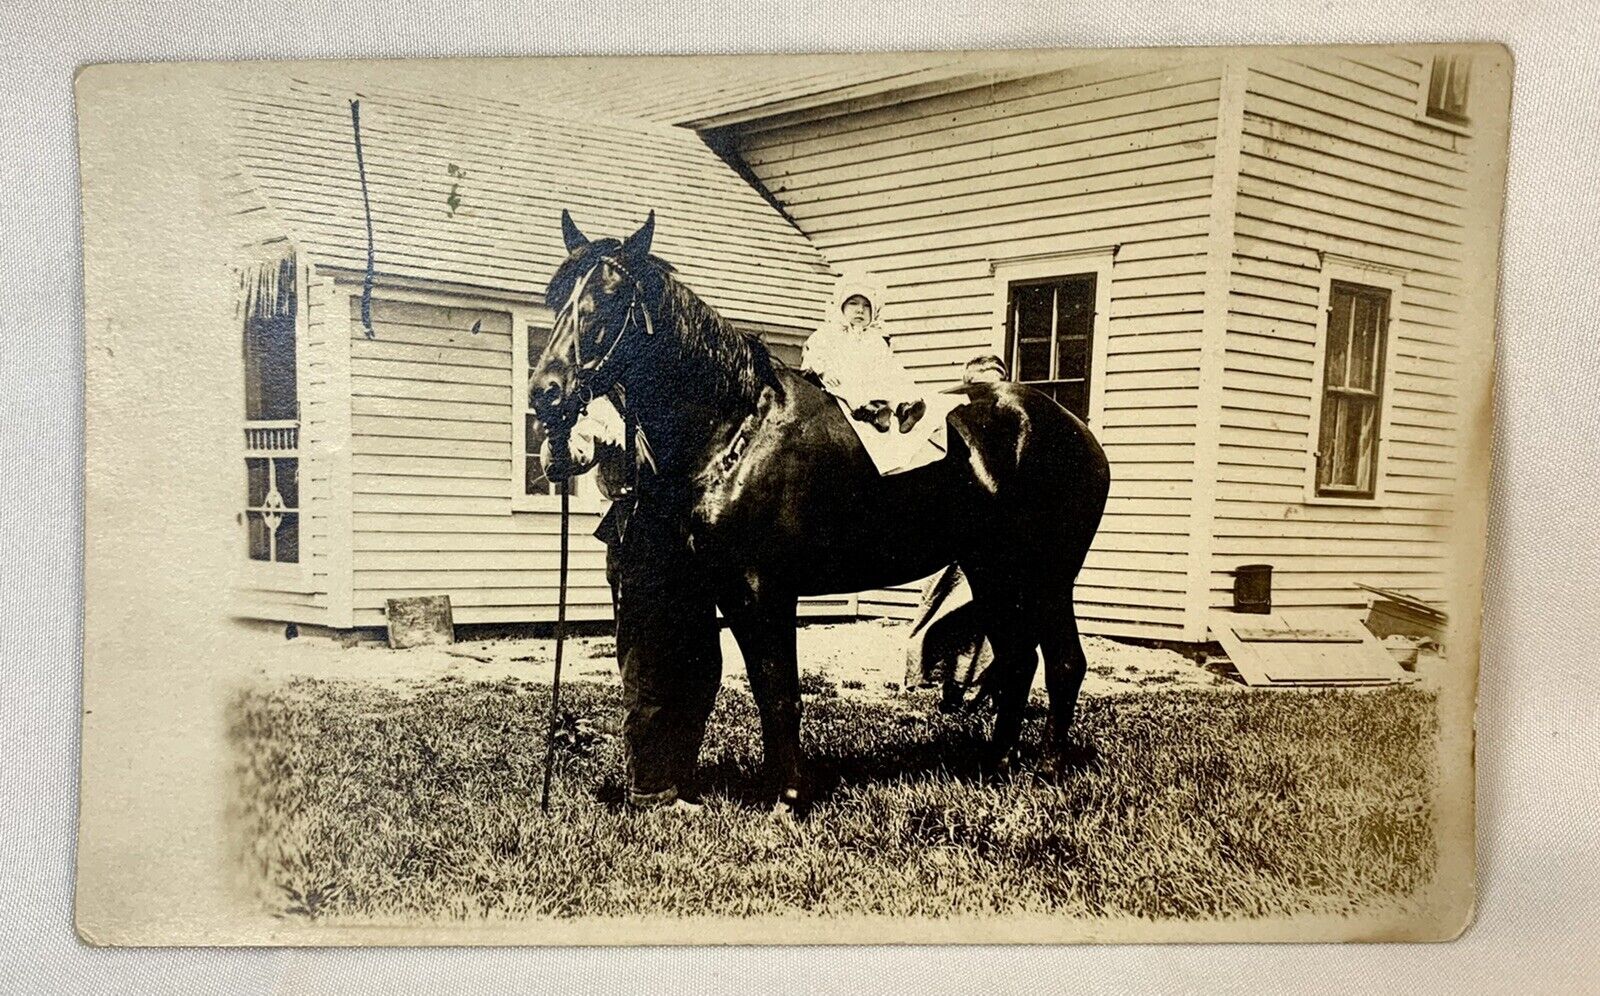 Vintage RPPC Hidden Mother & Father - Child Sitting On Horse Postcard c1900s